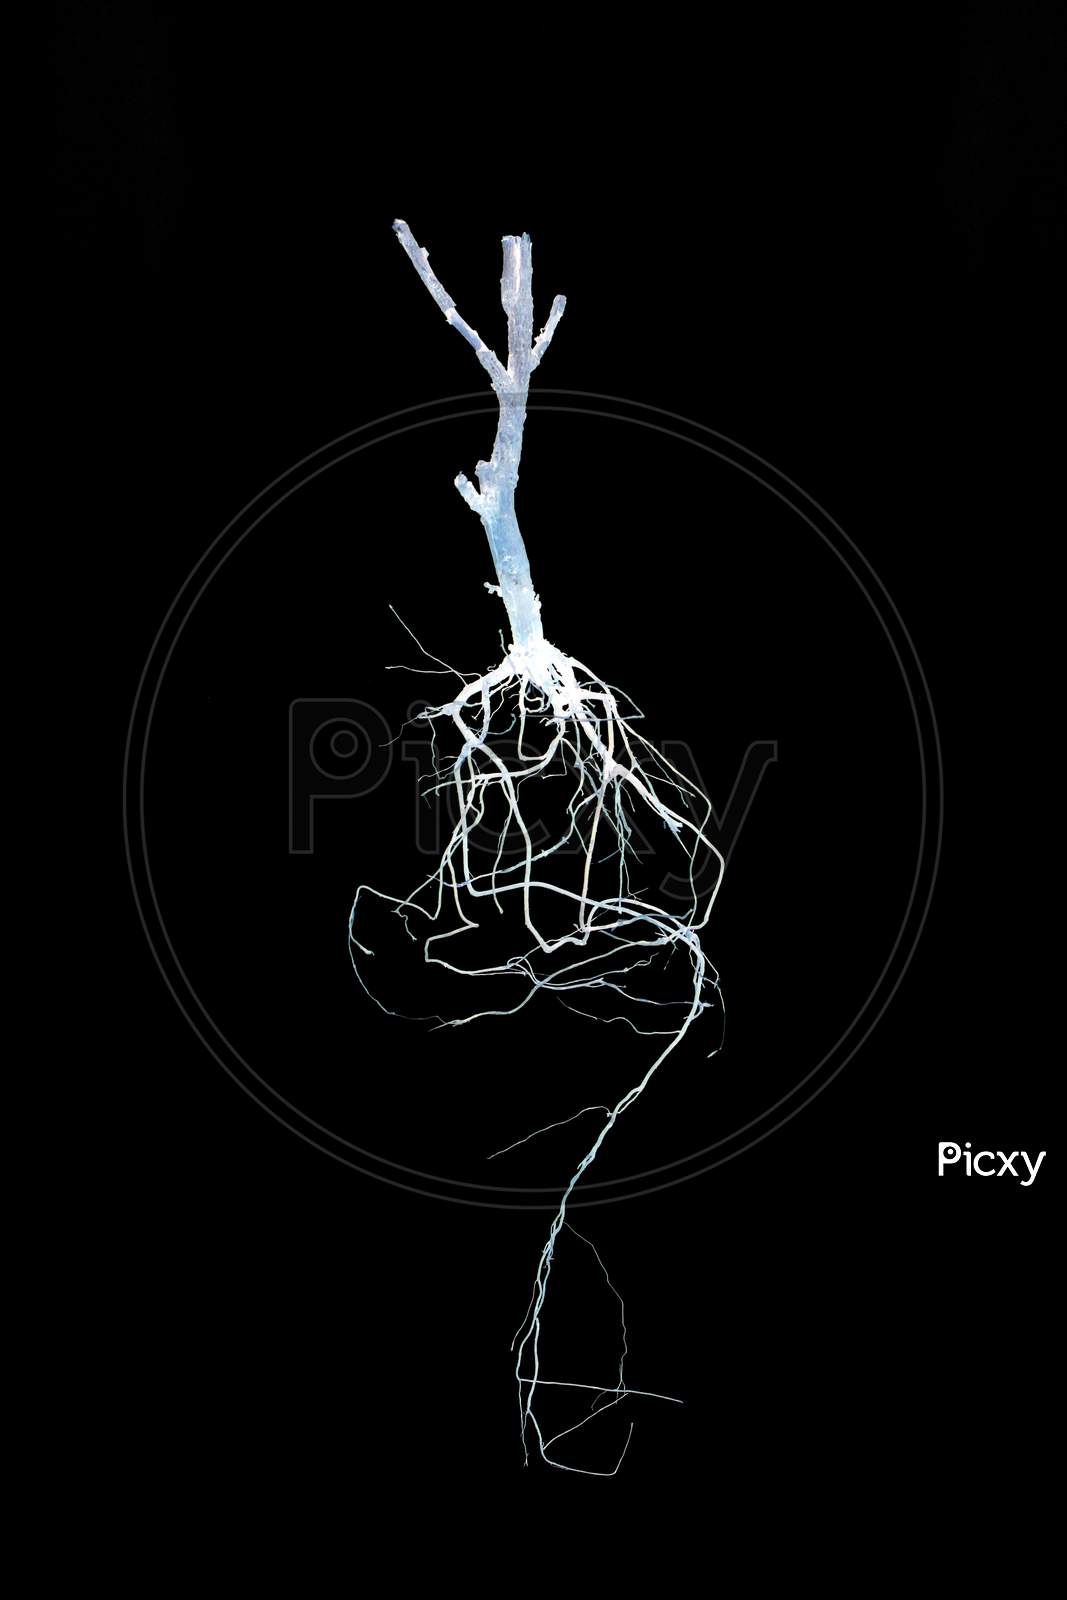 tree with roots illustration black and white